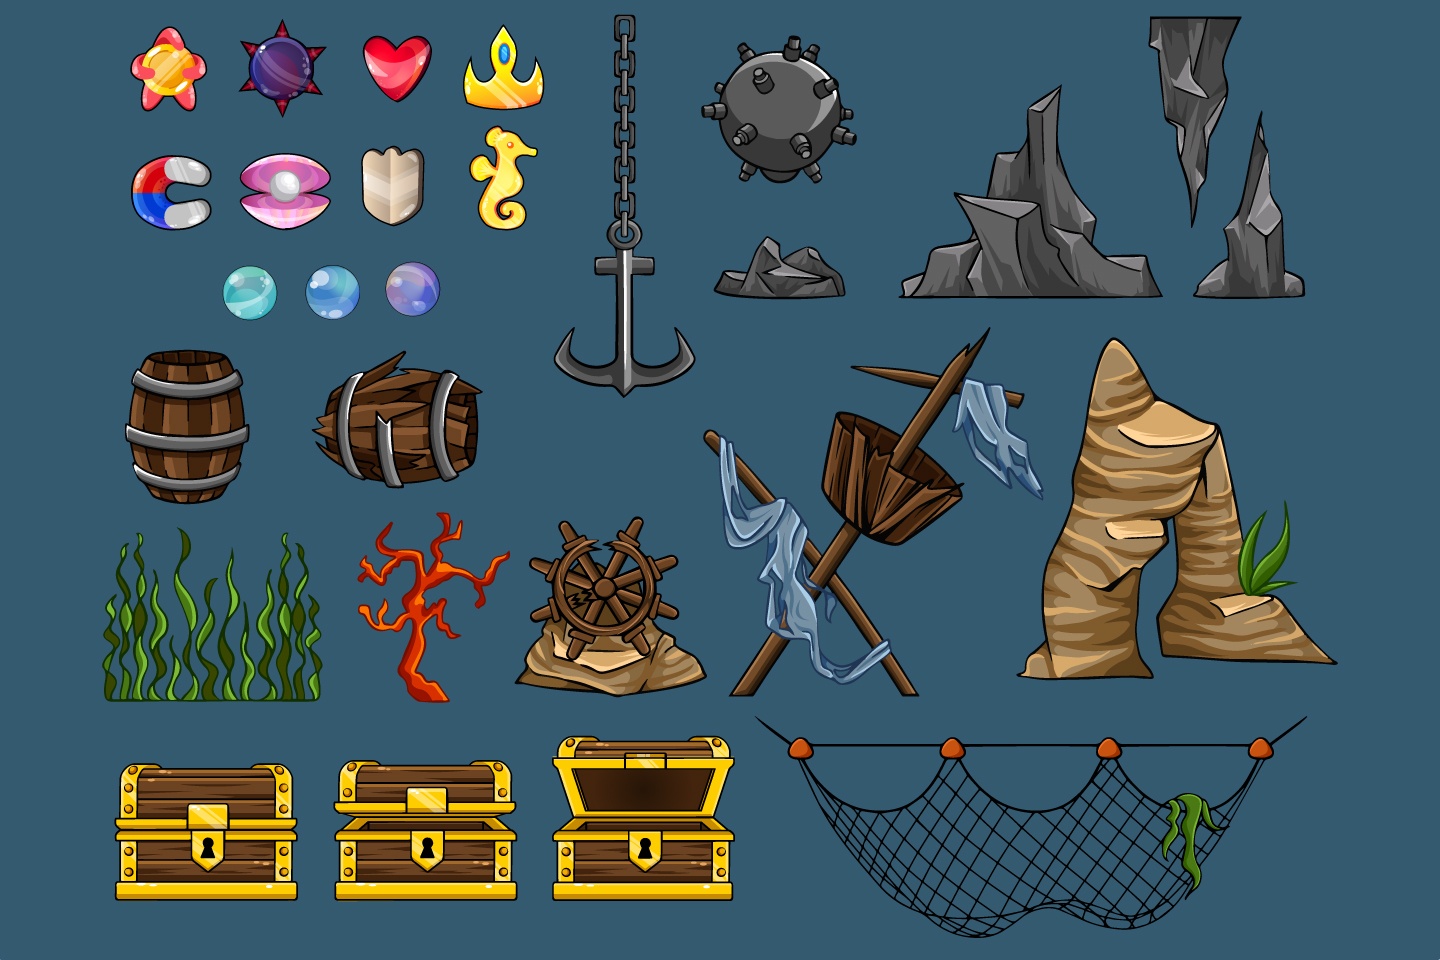 Free Underwater World 2D Game Objects 